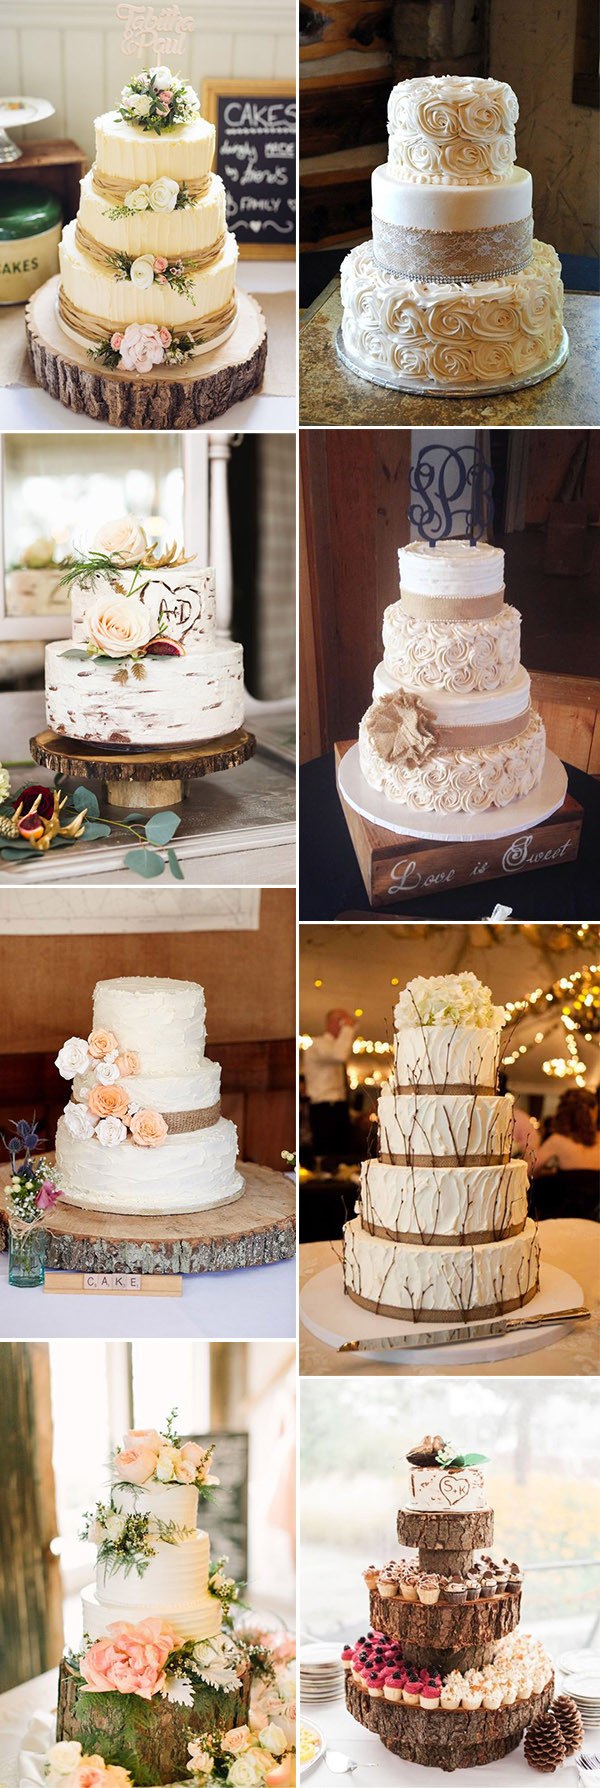 Barn Wedding Cakes
 50 Steal Worthy Wedding Cake Ideas For Your Special Day